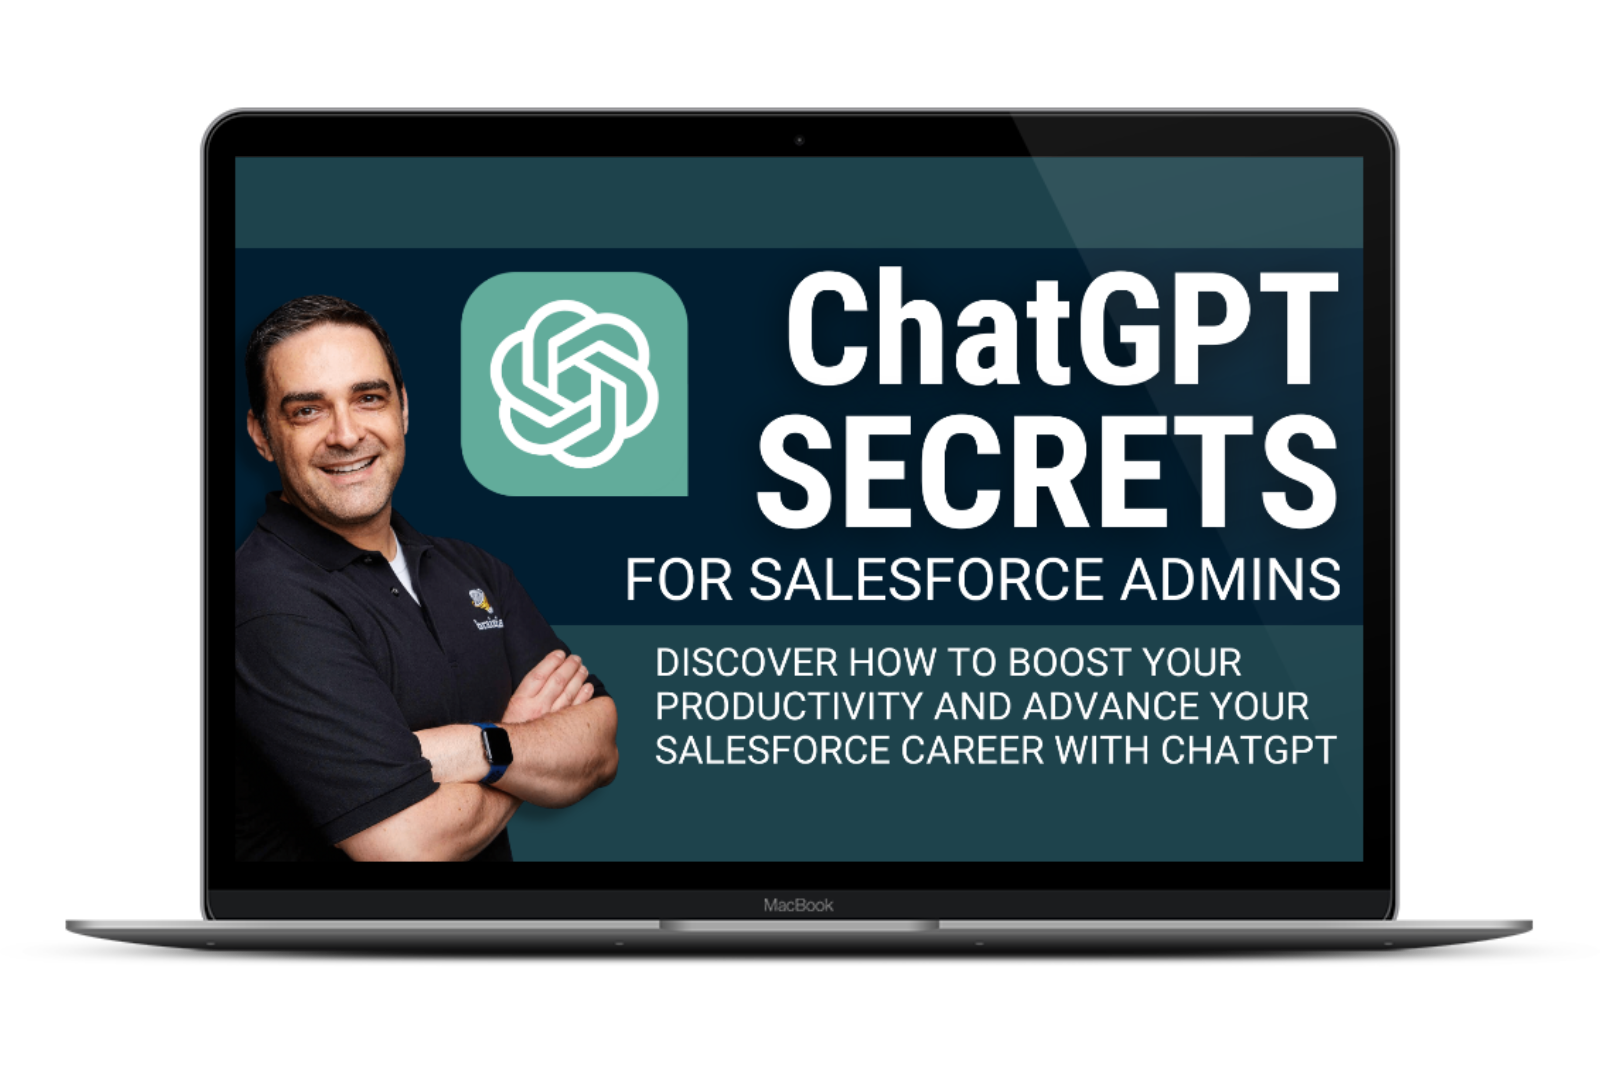 Discover How to Boost Your Productivity and Advance Your Salesforce Career with ChatGPT